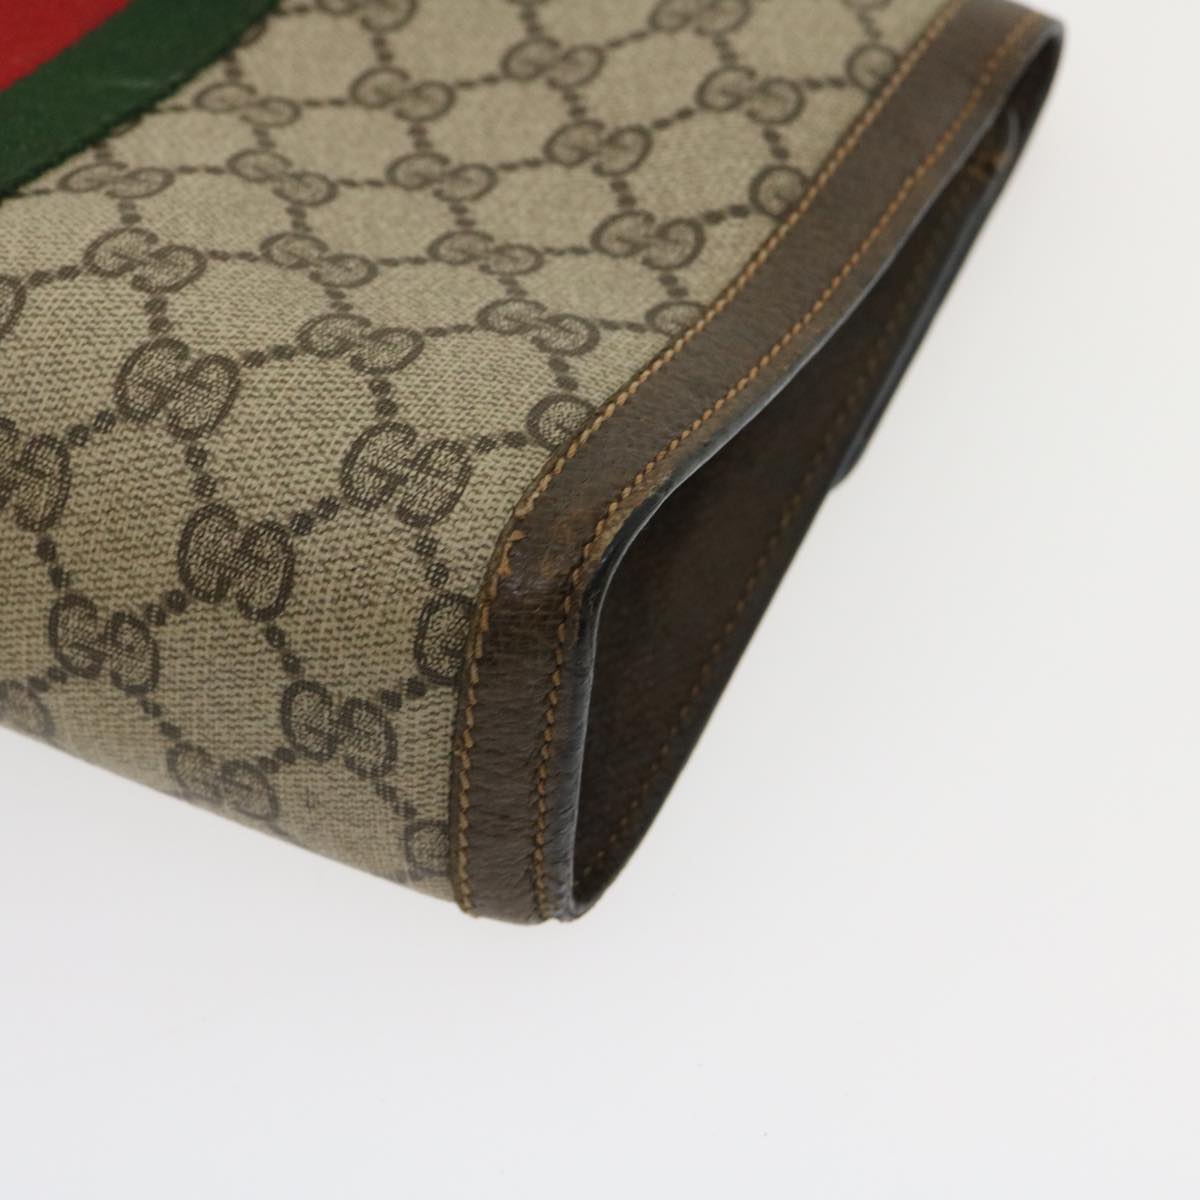 GUCCI Web Sherry Line GG Canvas Clutch Bag Beige Red Green Auth yk4350